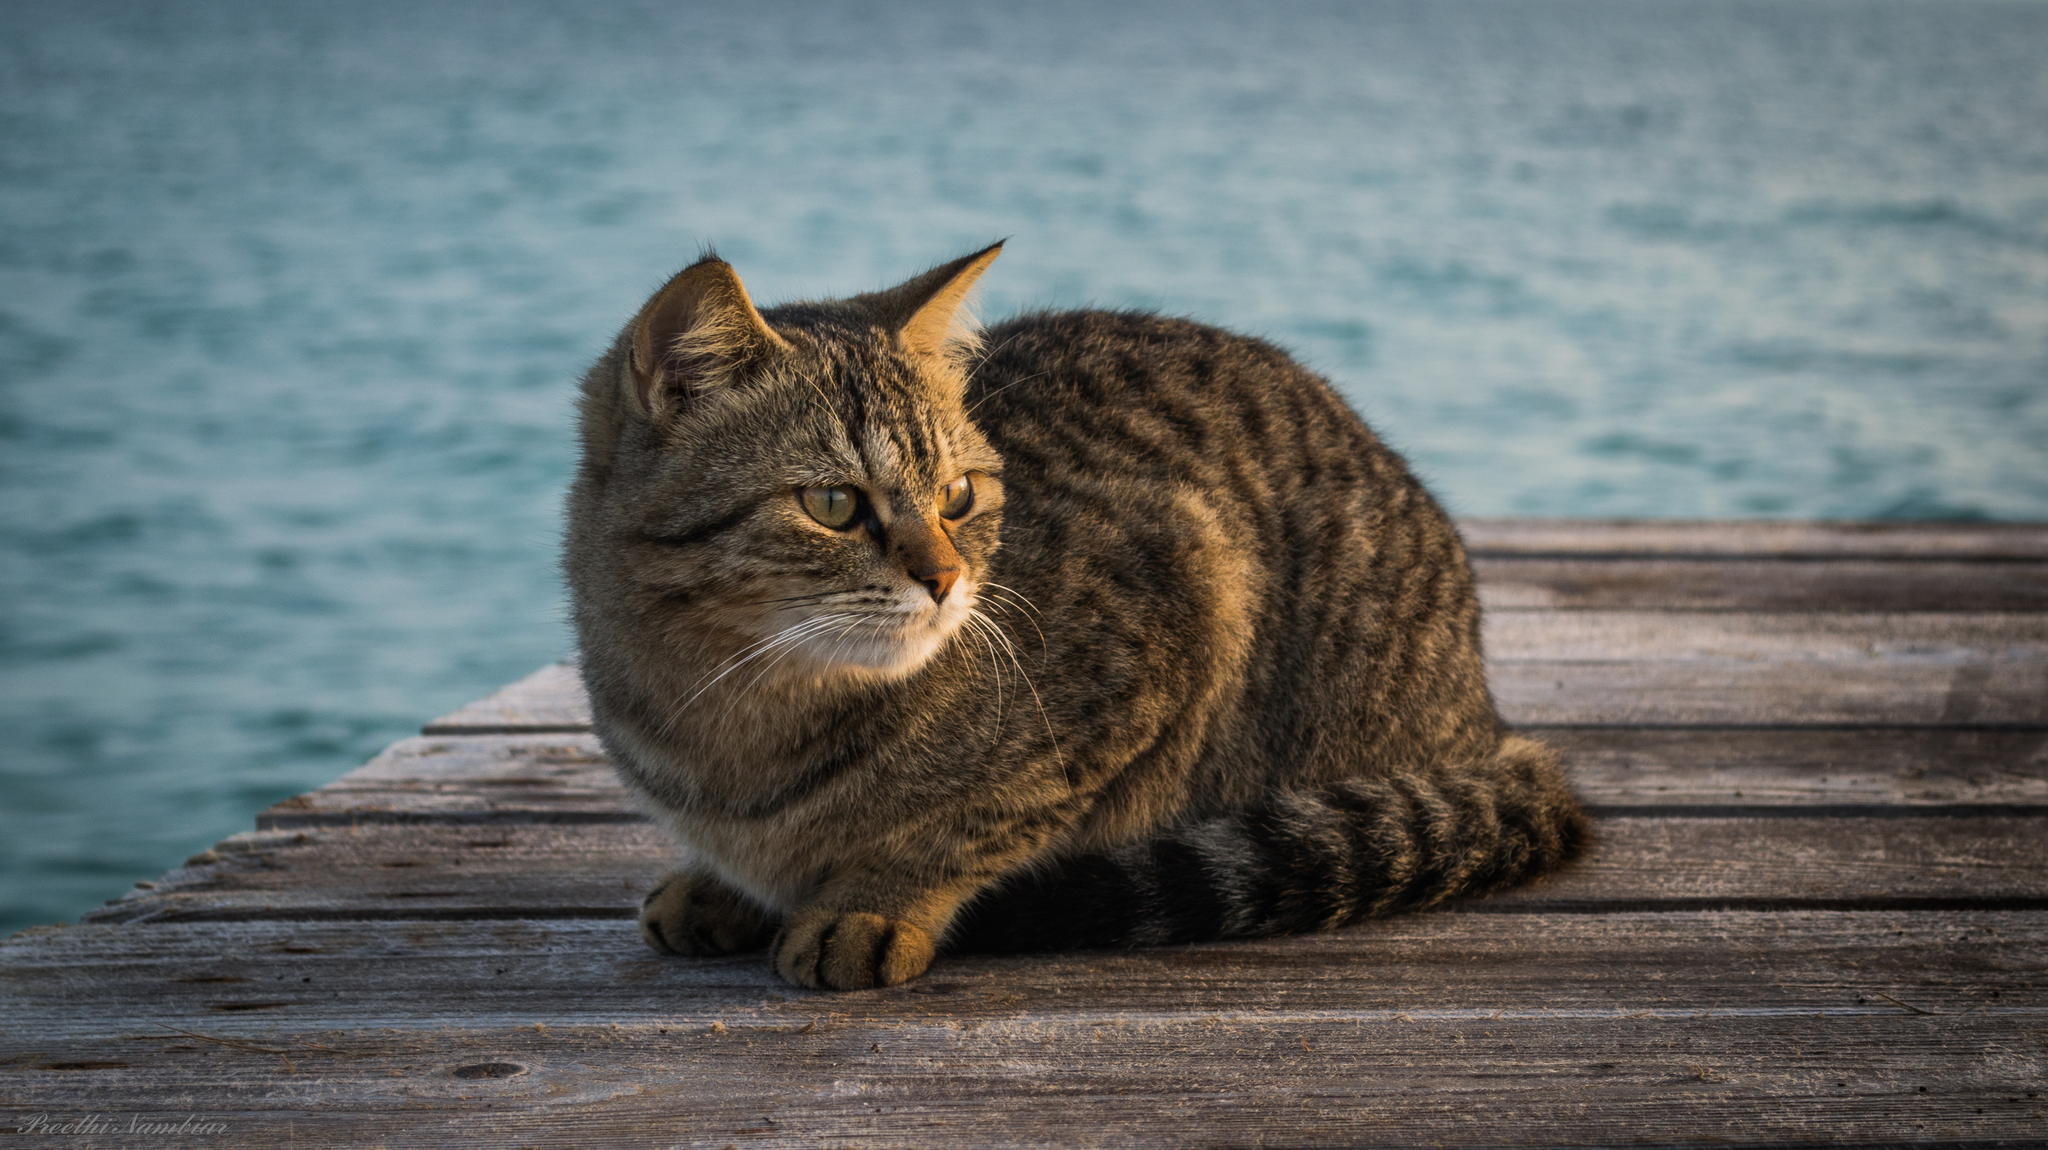 A cat sits on a wooden pier